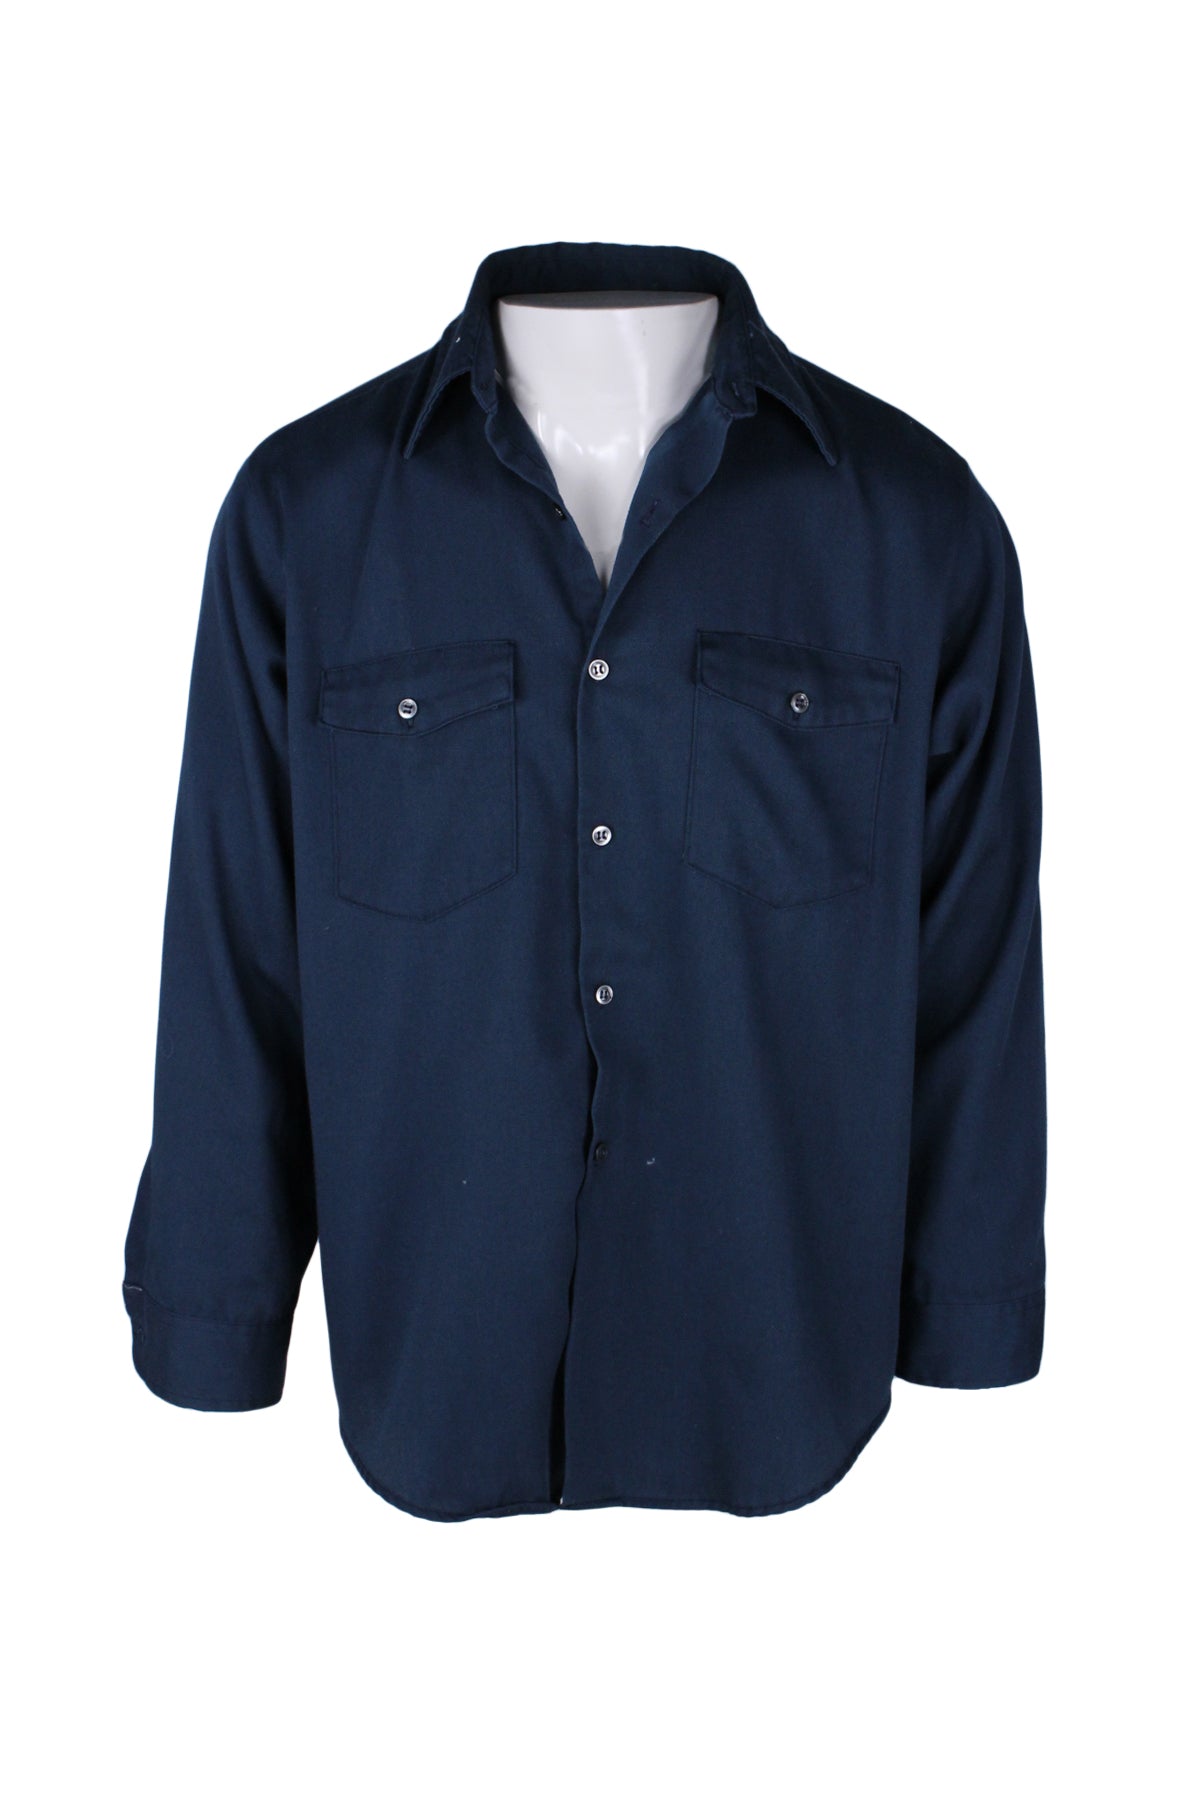 front angle of vintage big yank navy long sleeve button up shirt. features double breasted button flap pockets and buttons at cuffs.